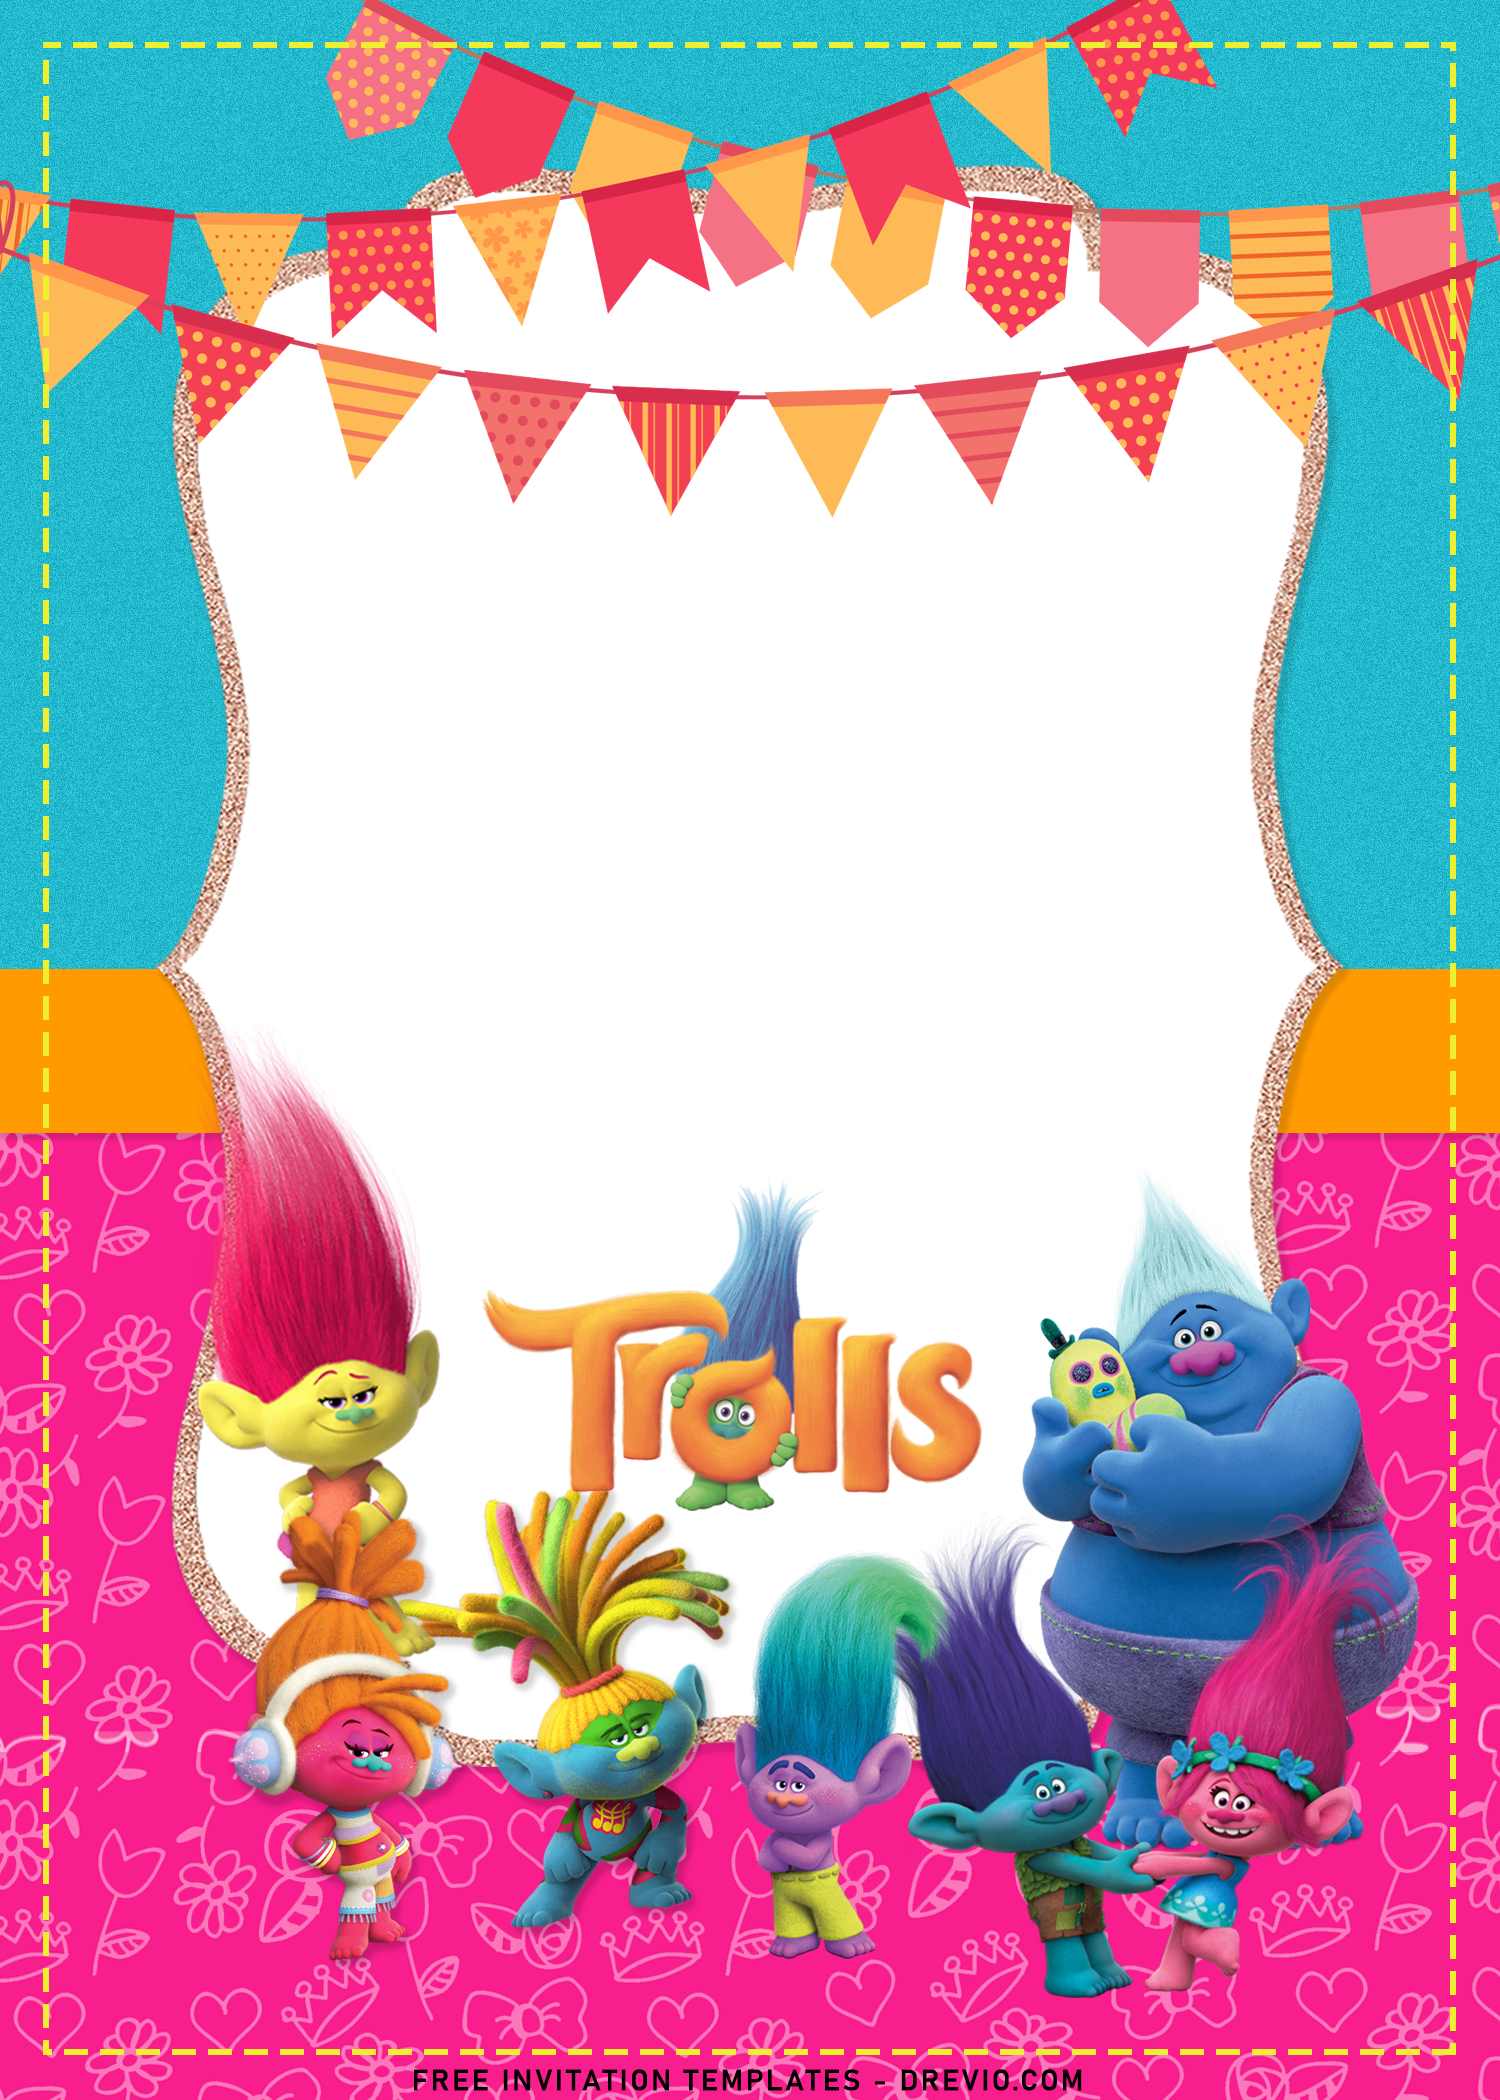 9-adorable-trolls-birthday-invitation-templates-for-your-kid-s-birthday-download-hundreds